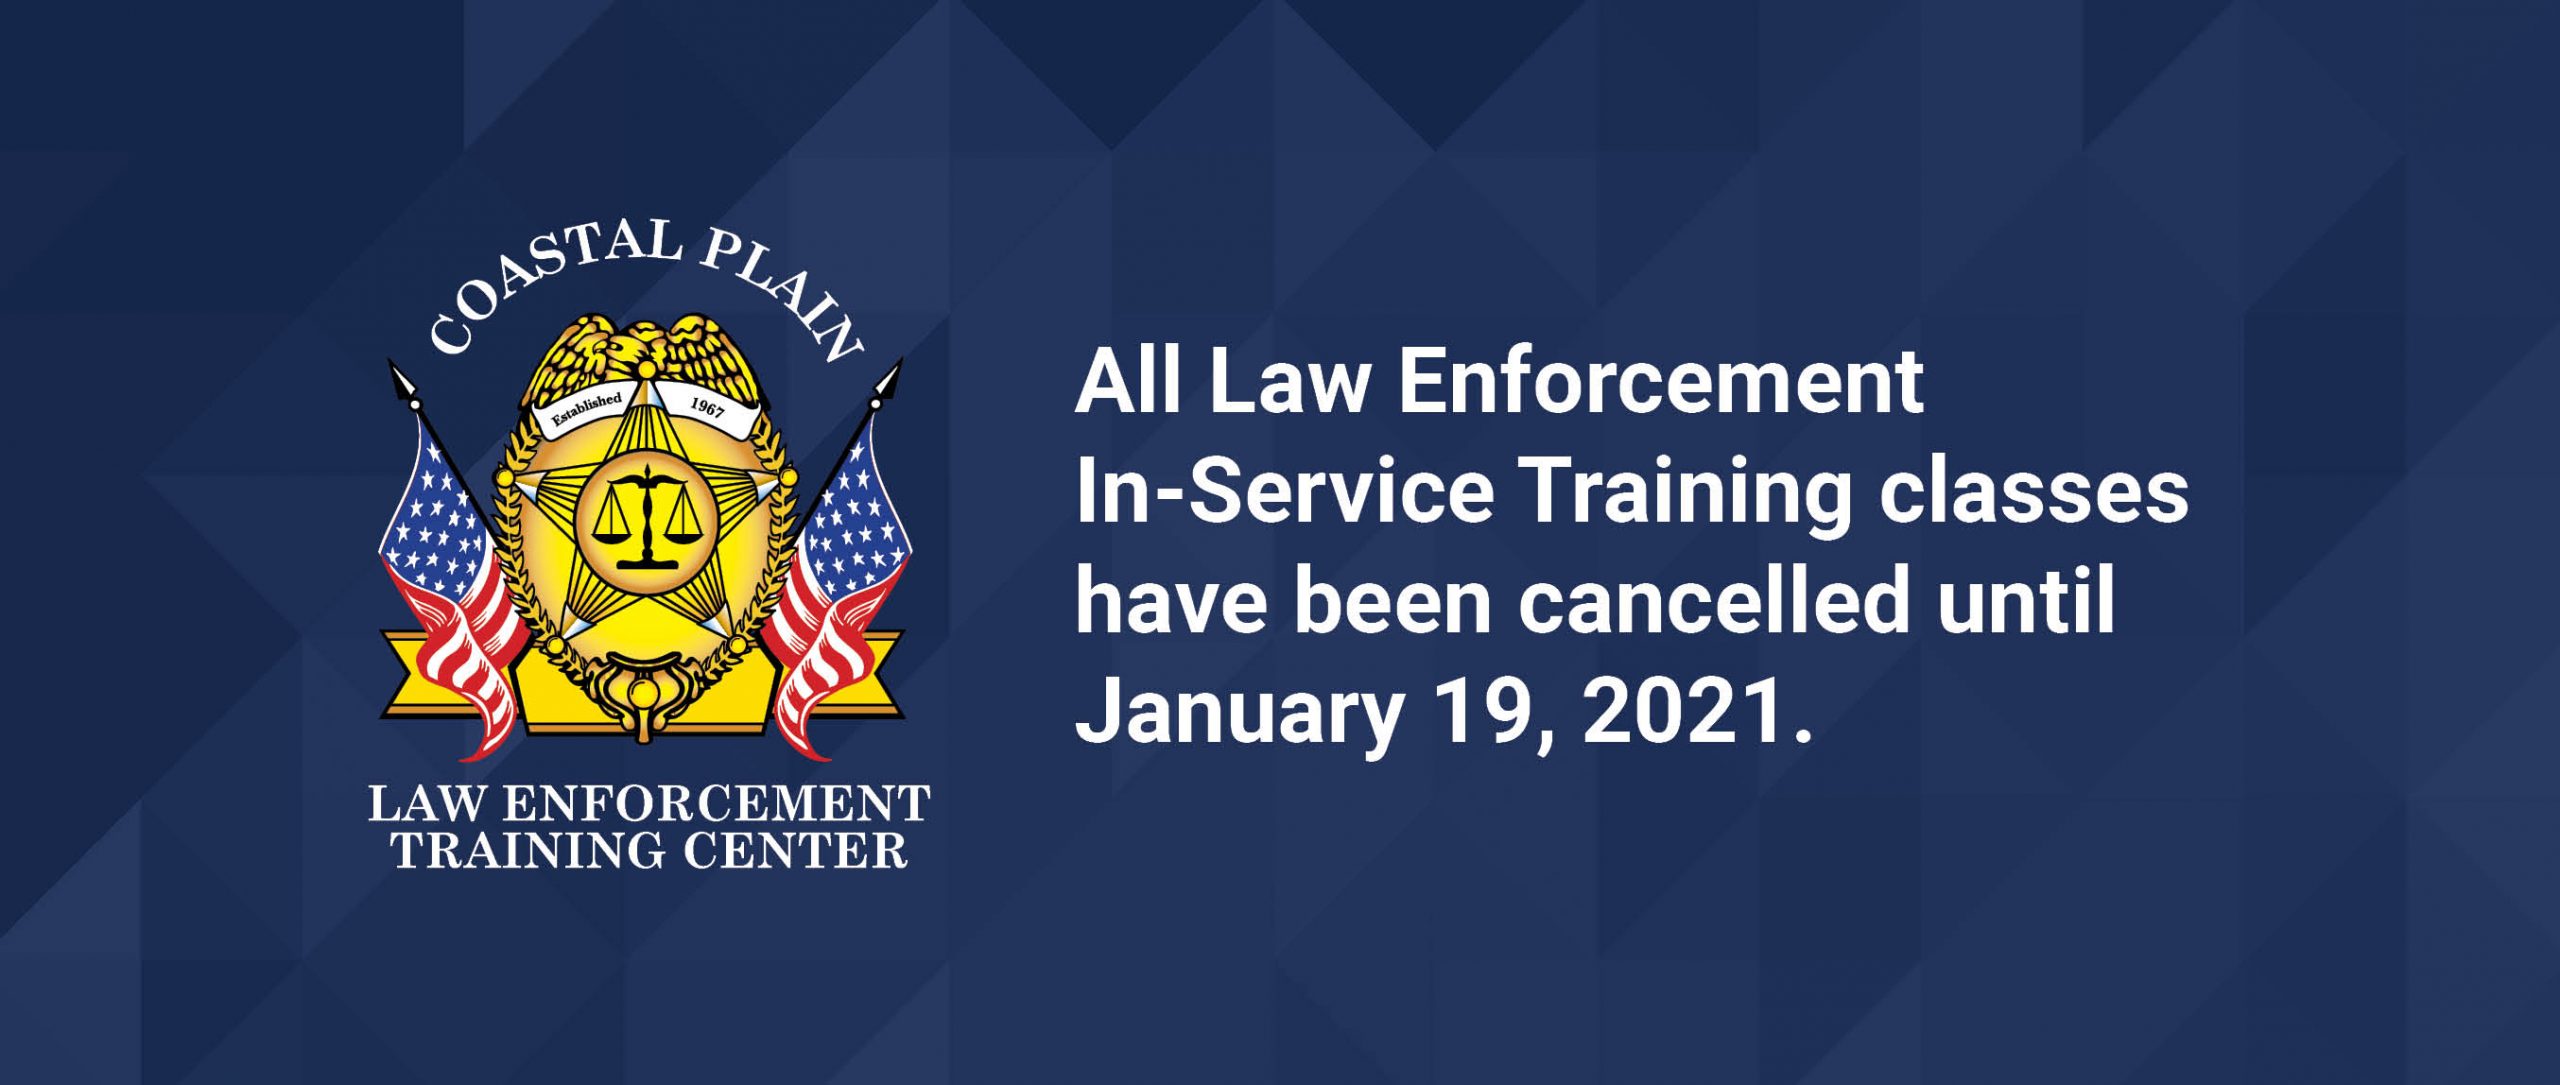 Coastal Plains In-Service training courses are suspended until January 19, 2021.